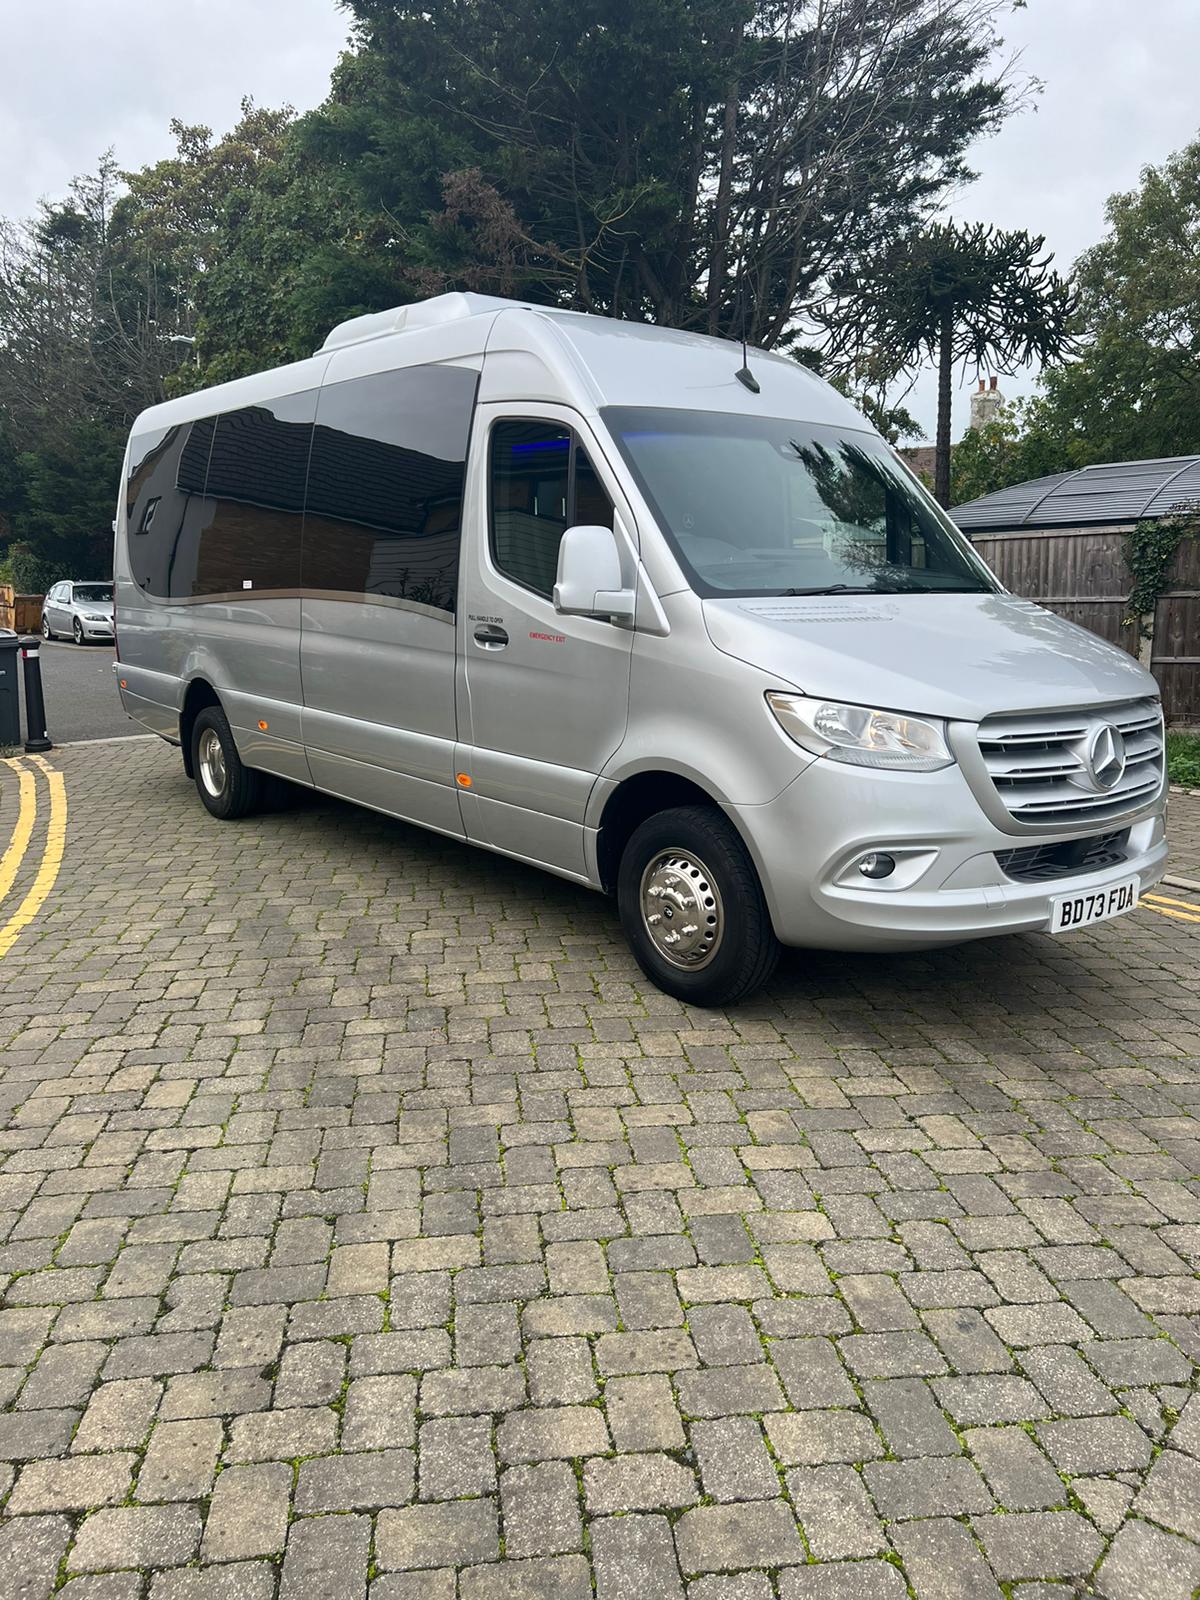 Discover the Comfort and Convenience of 16 Seater Minibuses with Driver in Birmingham